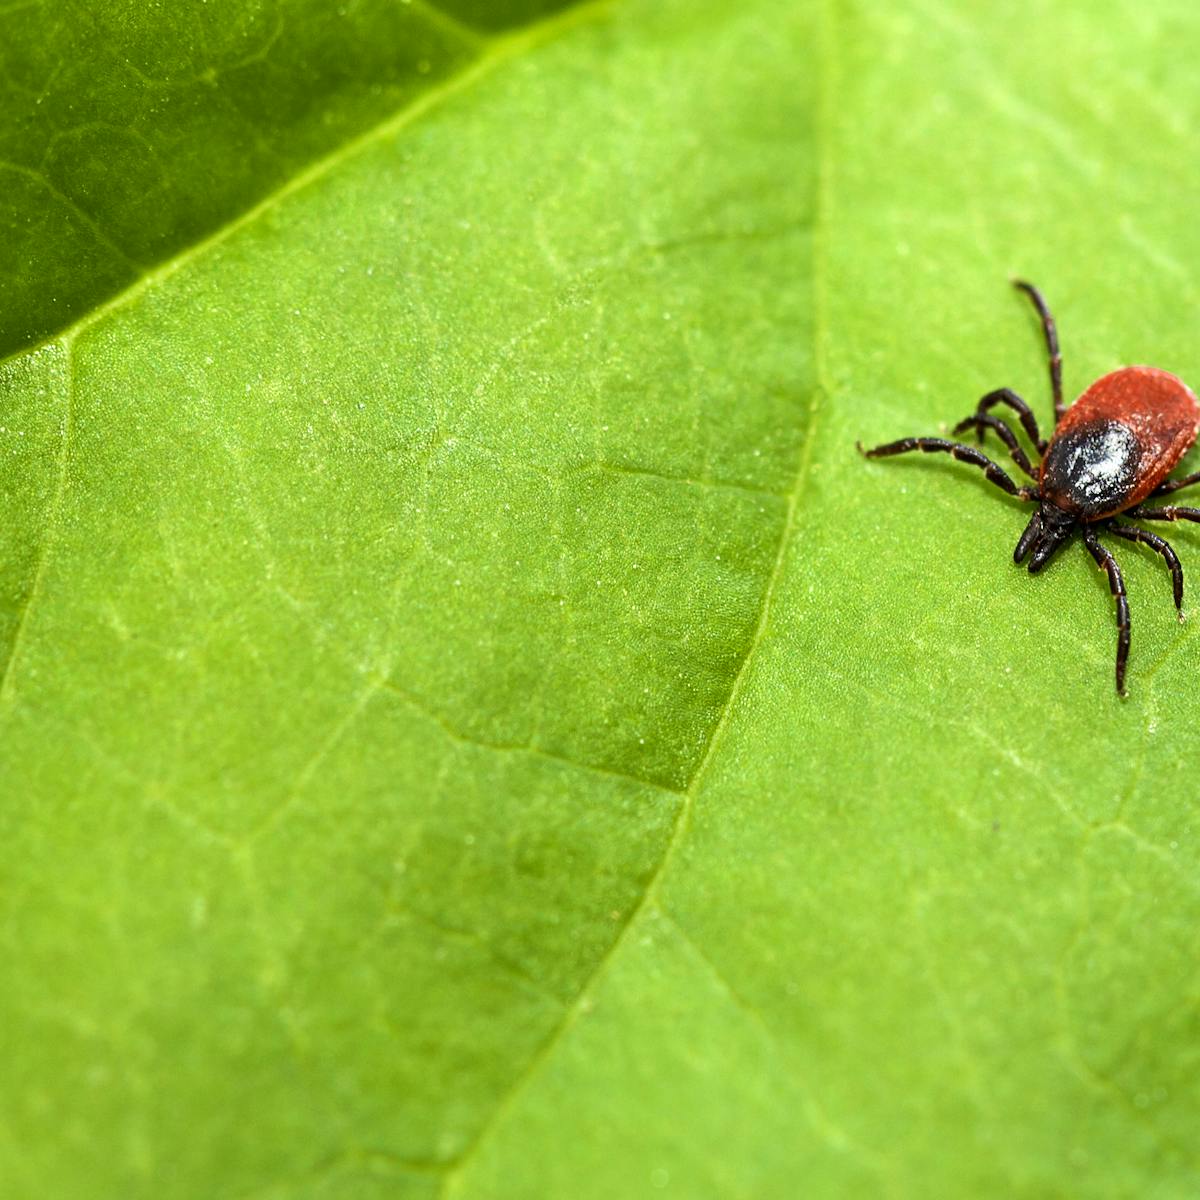 Lyme carditis: Things can get complicated when Lyme disease affects heart  function